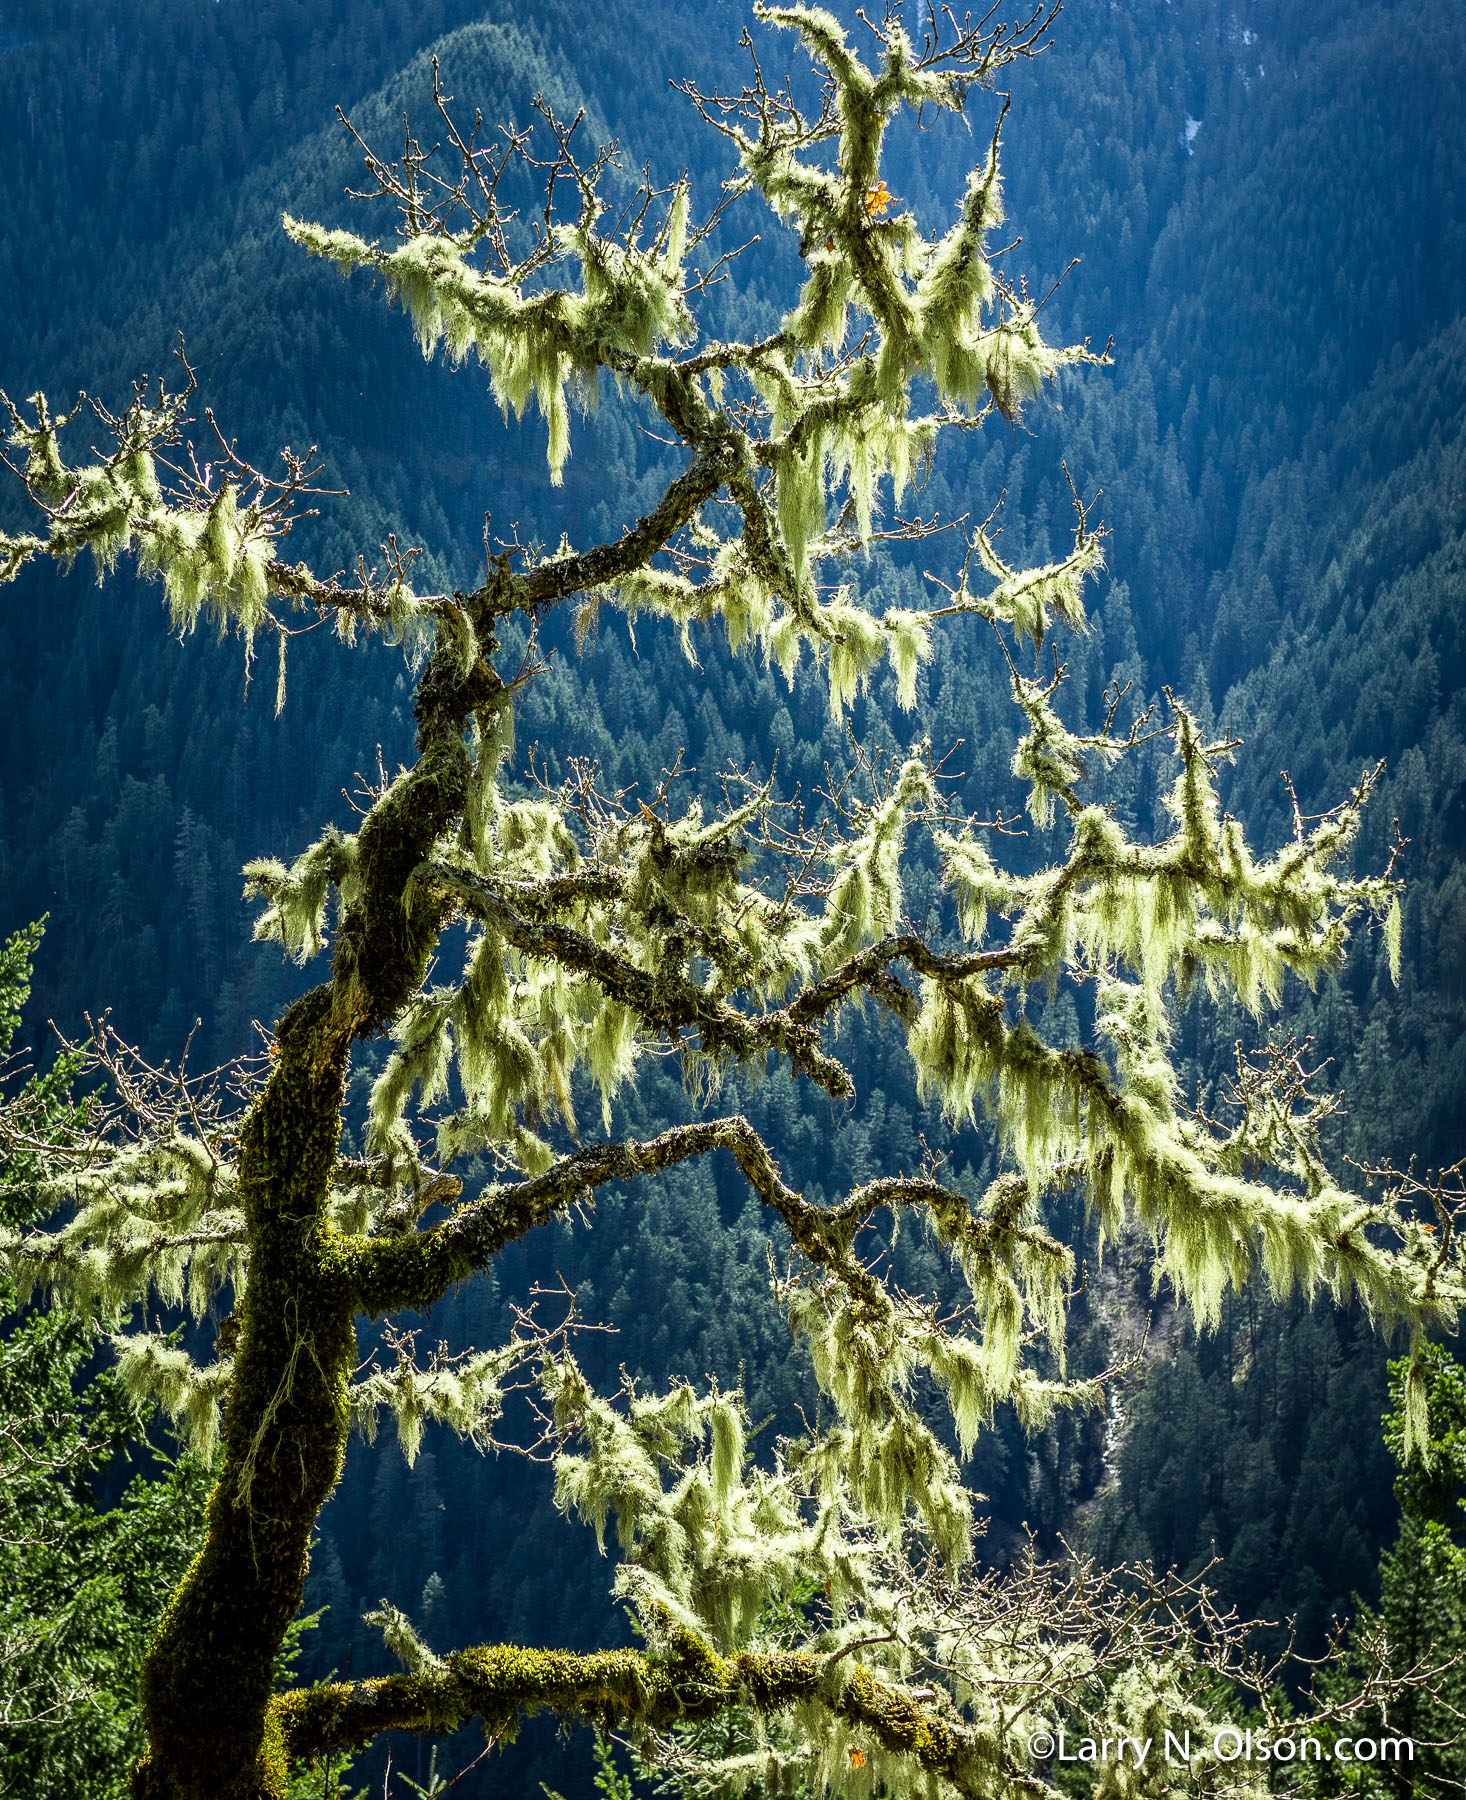 Big leaf Maple, Eagle Creek, Columbia River Gorge, OR | Lichen covered Big leaf Maple is barren of leaves ion this clear winter day.